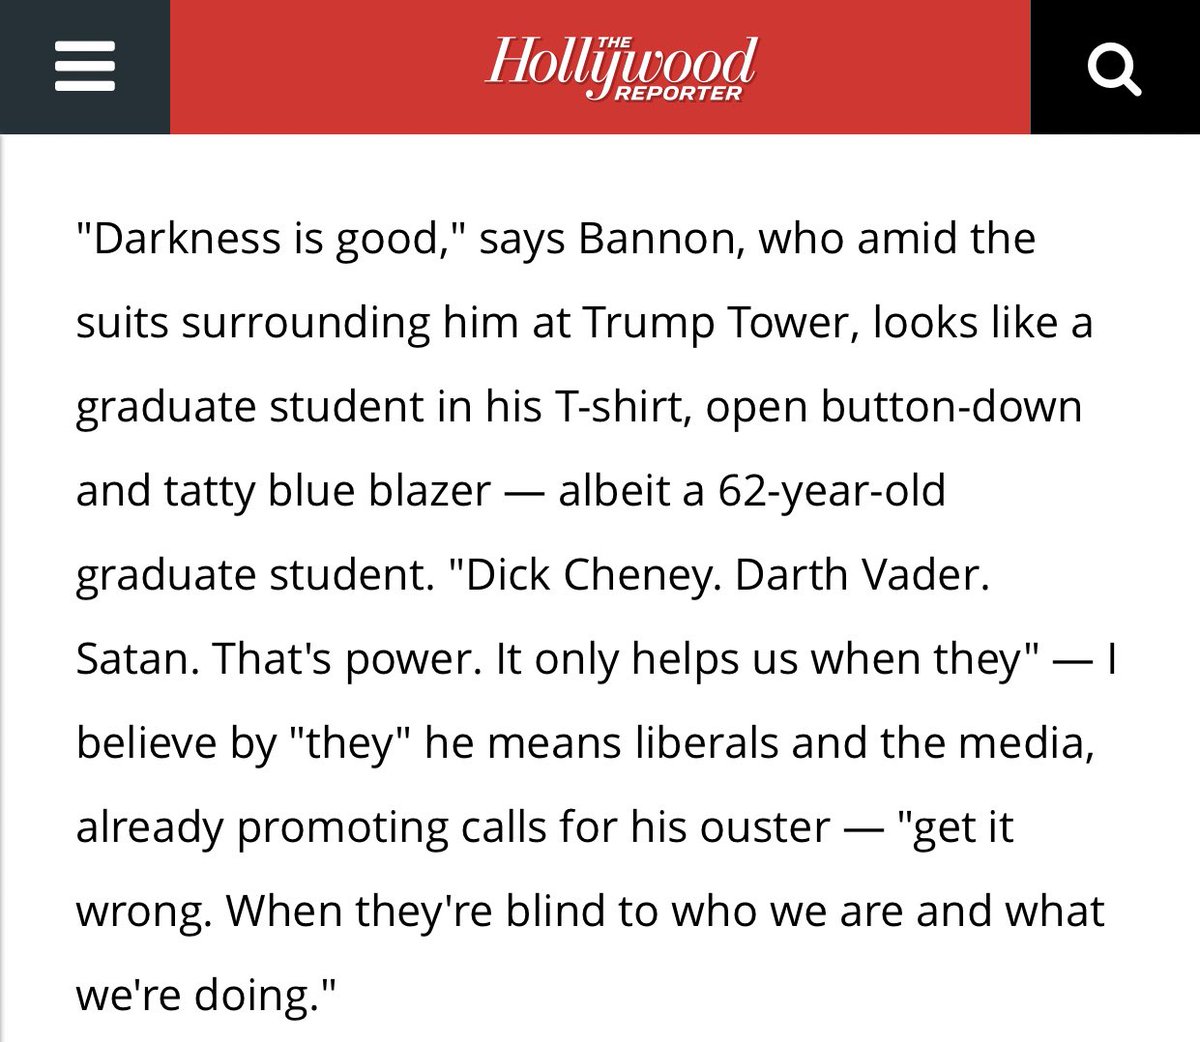 Bannon didn’t invent non-linear warfare, but he’s a skilled practitioner. Here’s how he described it in 2016:“Darkness is good. Dick Cheney. Darth Vader. Satan. That’s power. It only helps us when they get it wrong. When they’re blind to who we are and what we’re doing.”